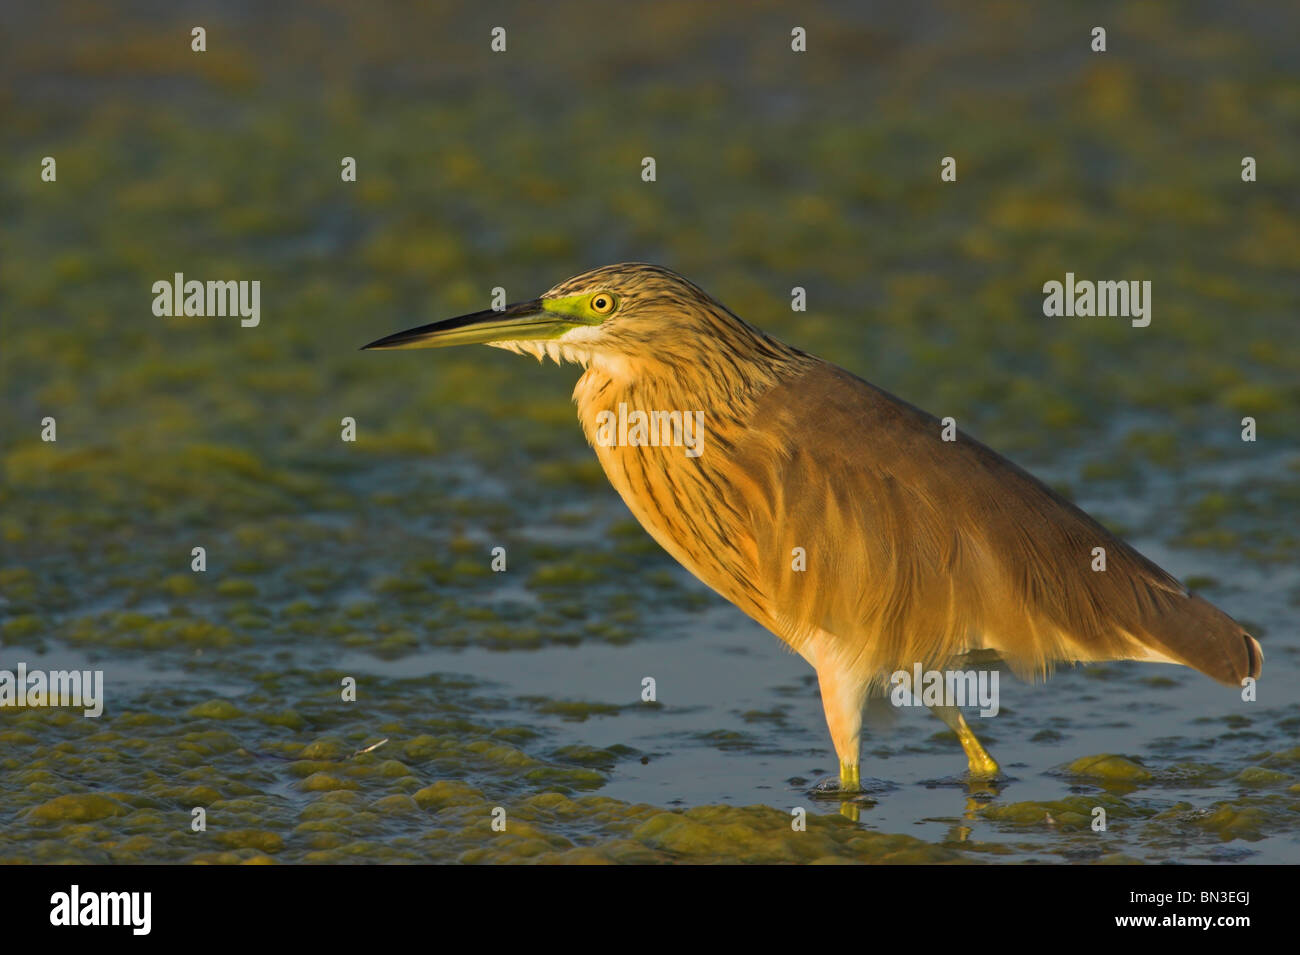 Squacco Heron (Ardeola ralloides) in shallow water, side view Stock Photo